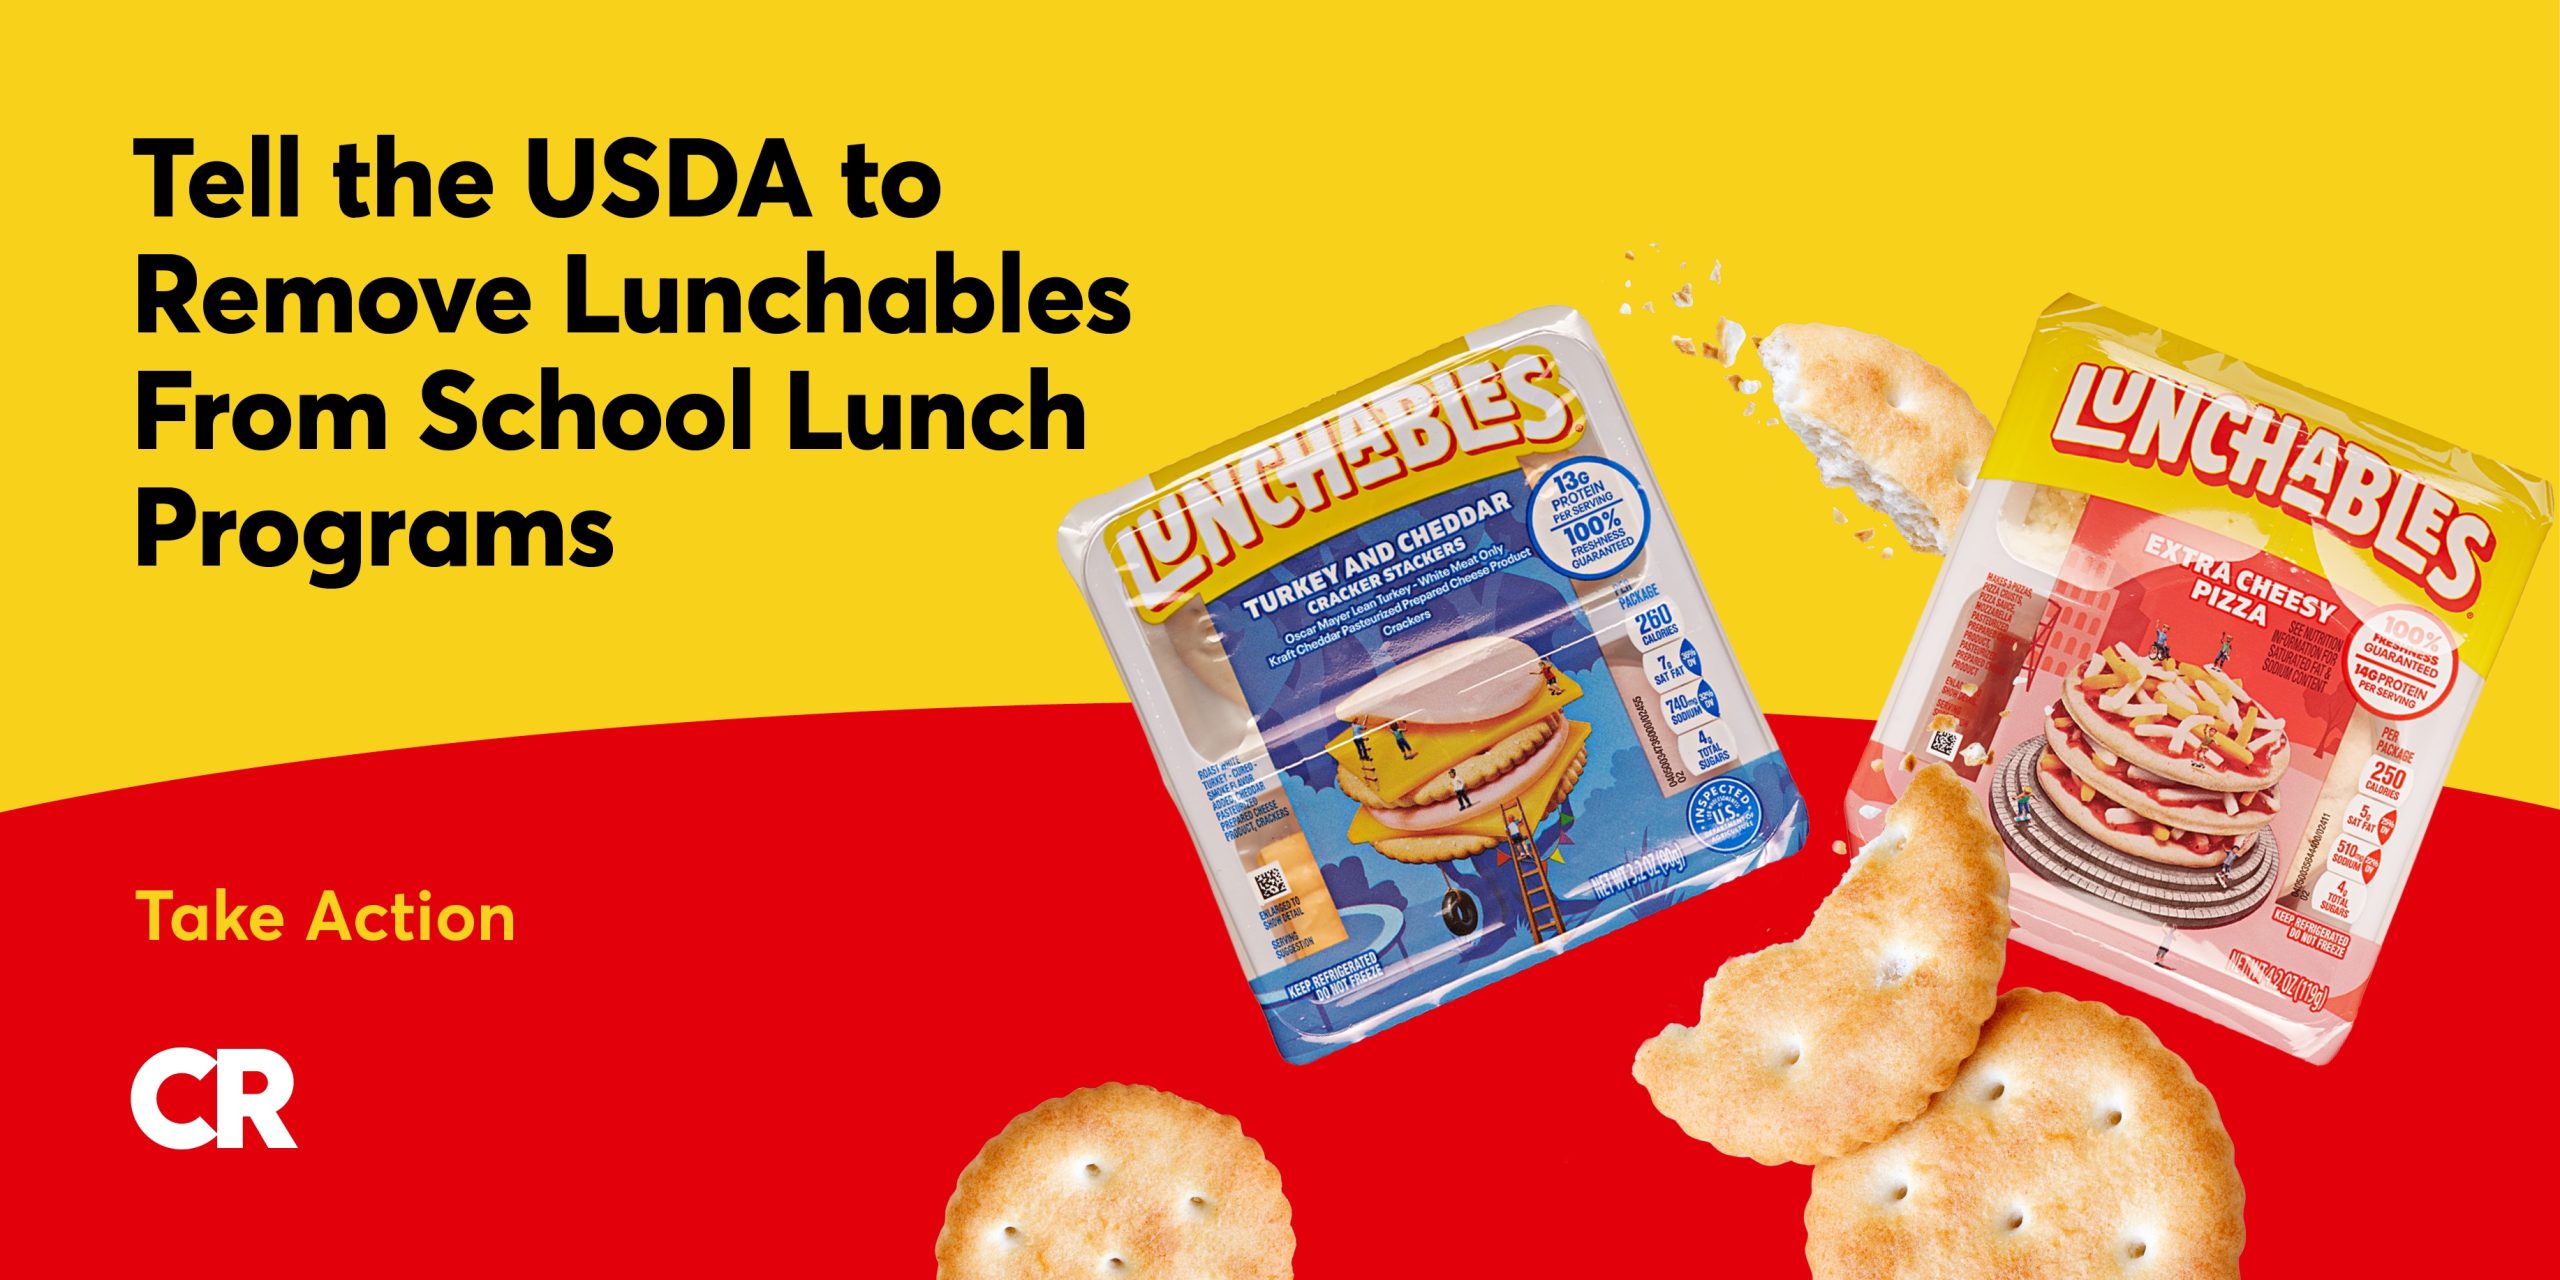 Consumer Reports petitions the USDA to have lunchables removed from school menus, saying they “should not be allowed.”